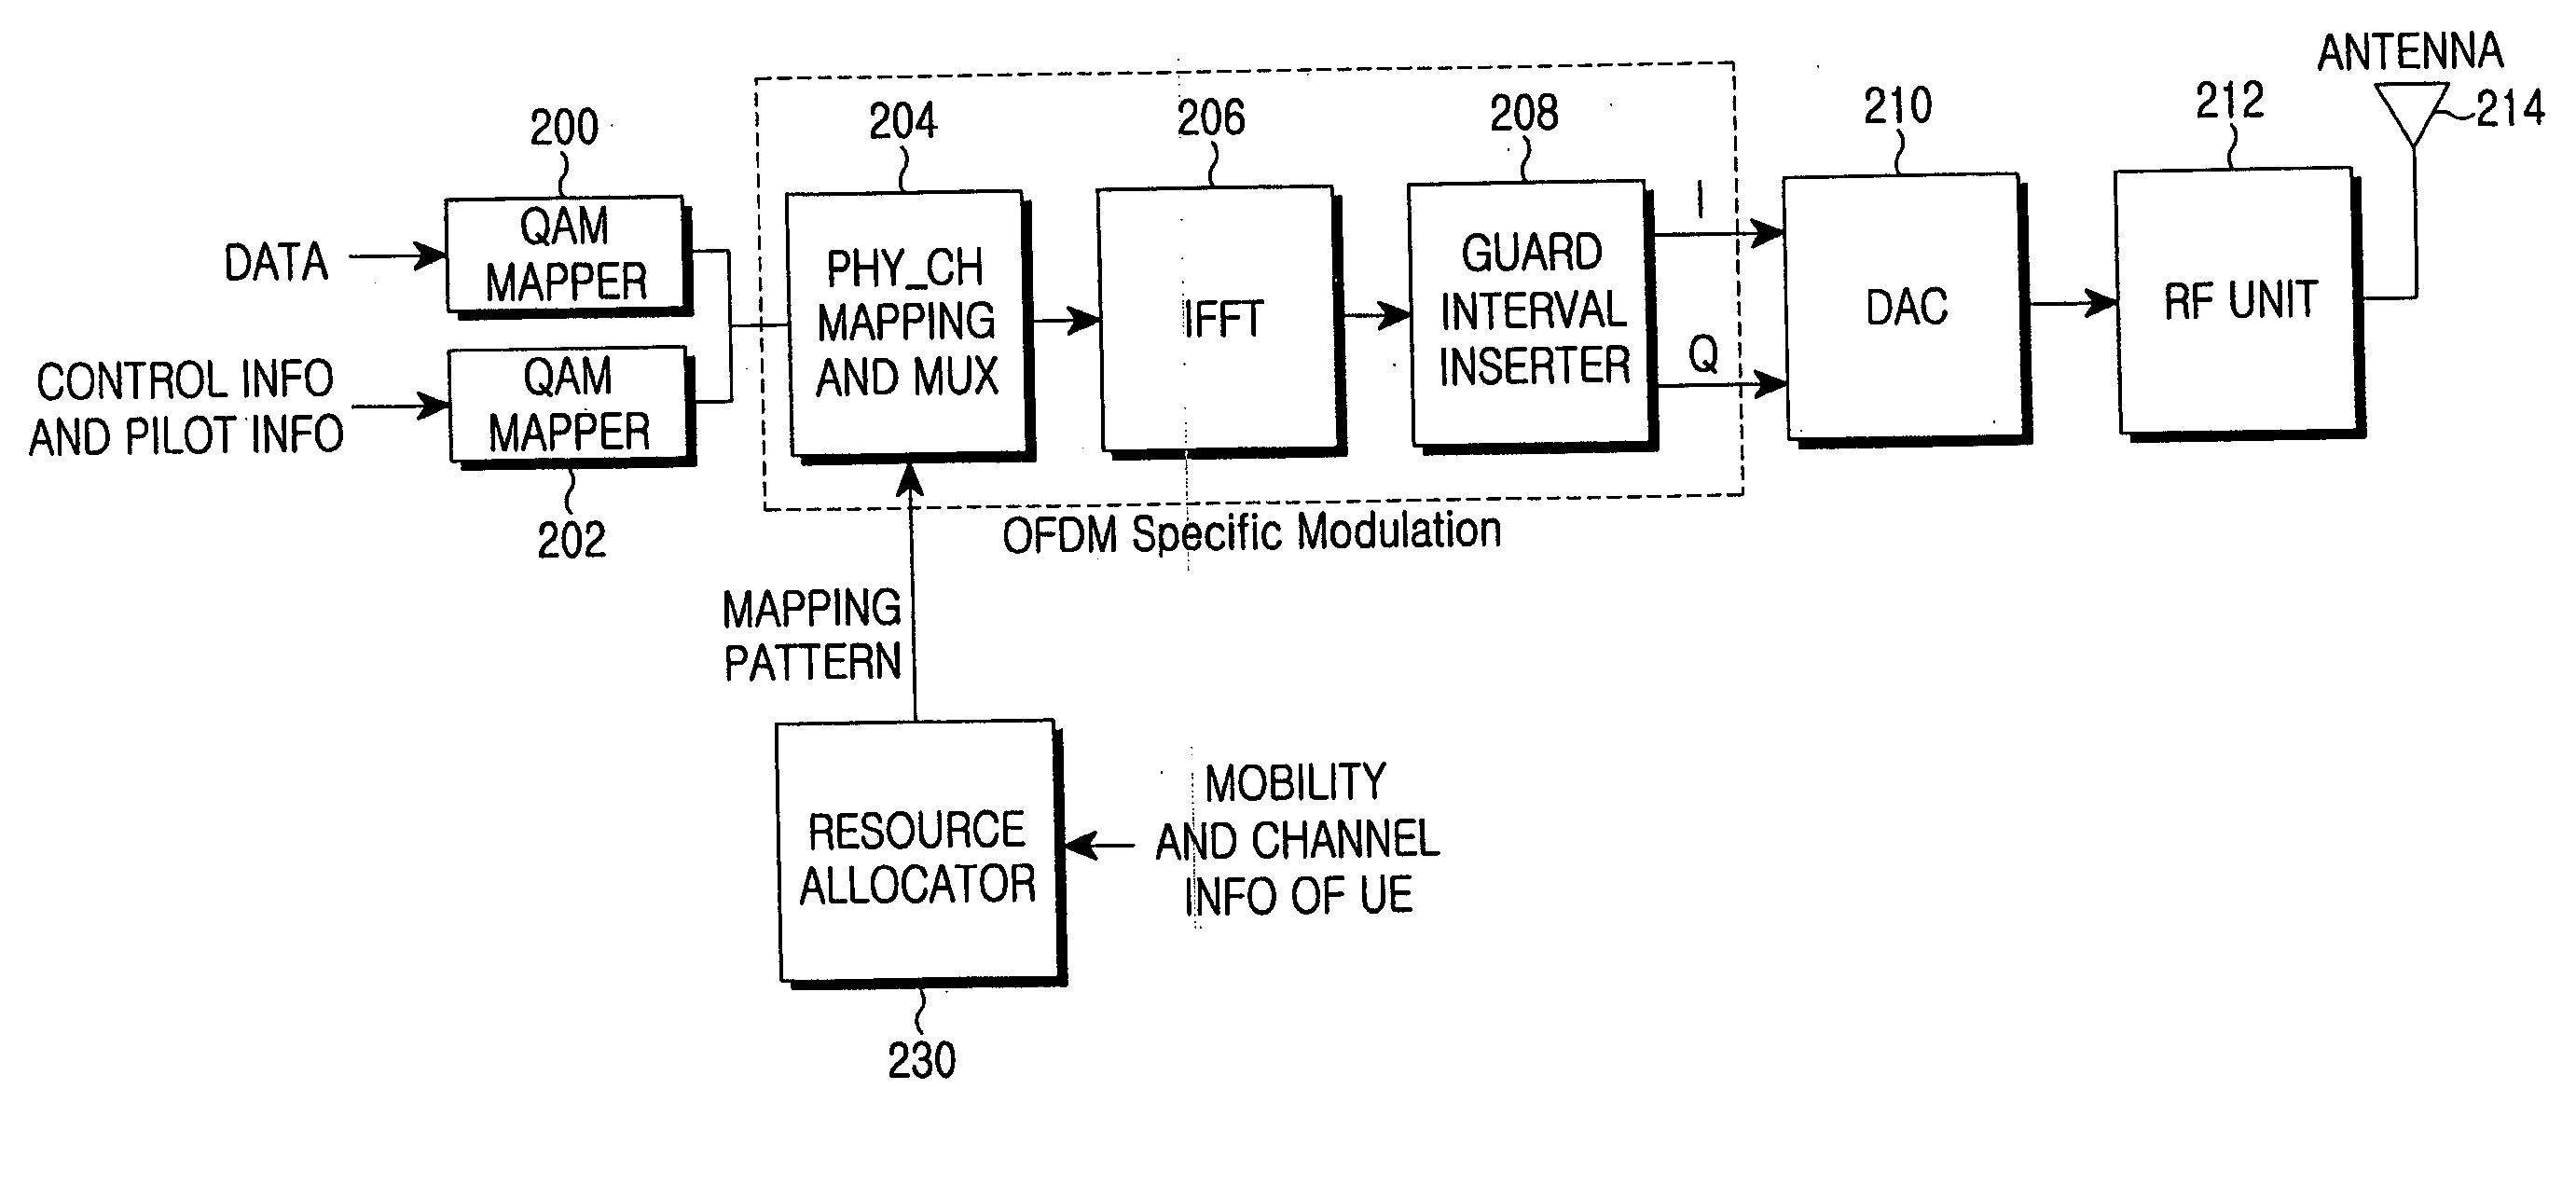 Apparatus and method for allocating frequencies in an OFDM mobile communication system supporting high speed downlink packet access service